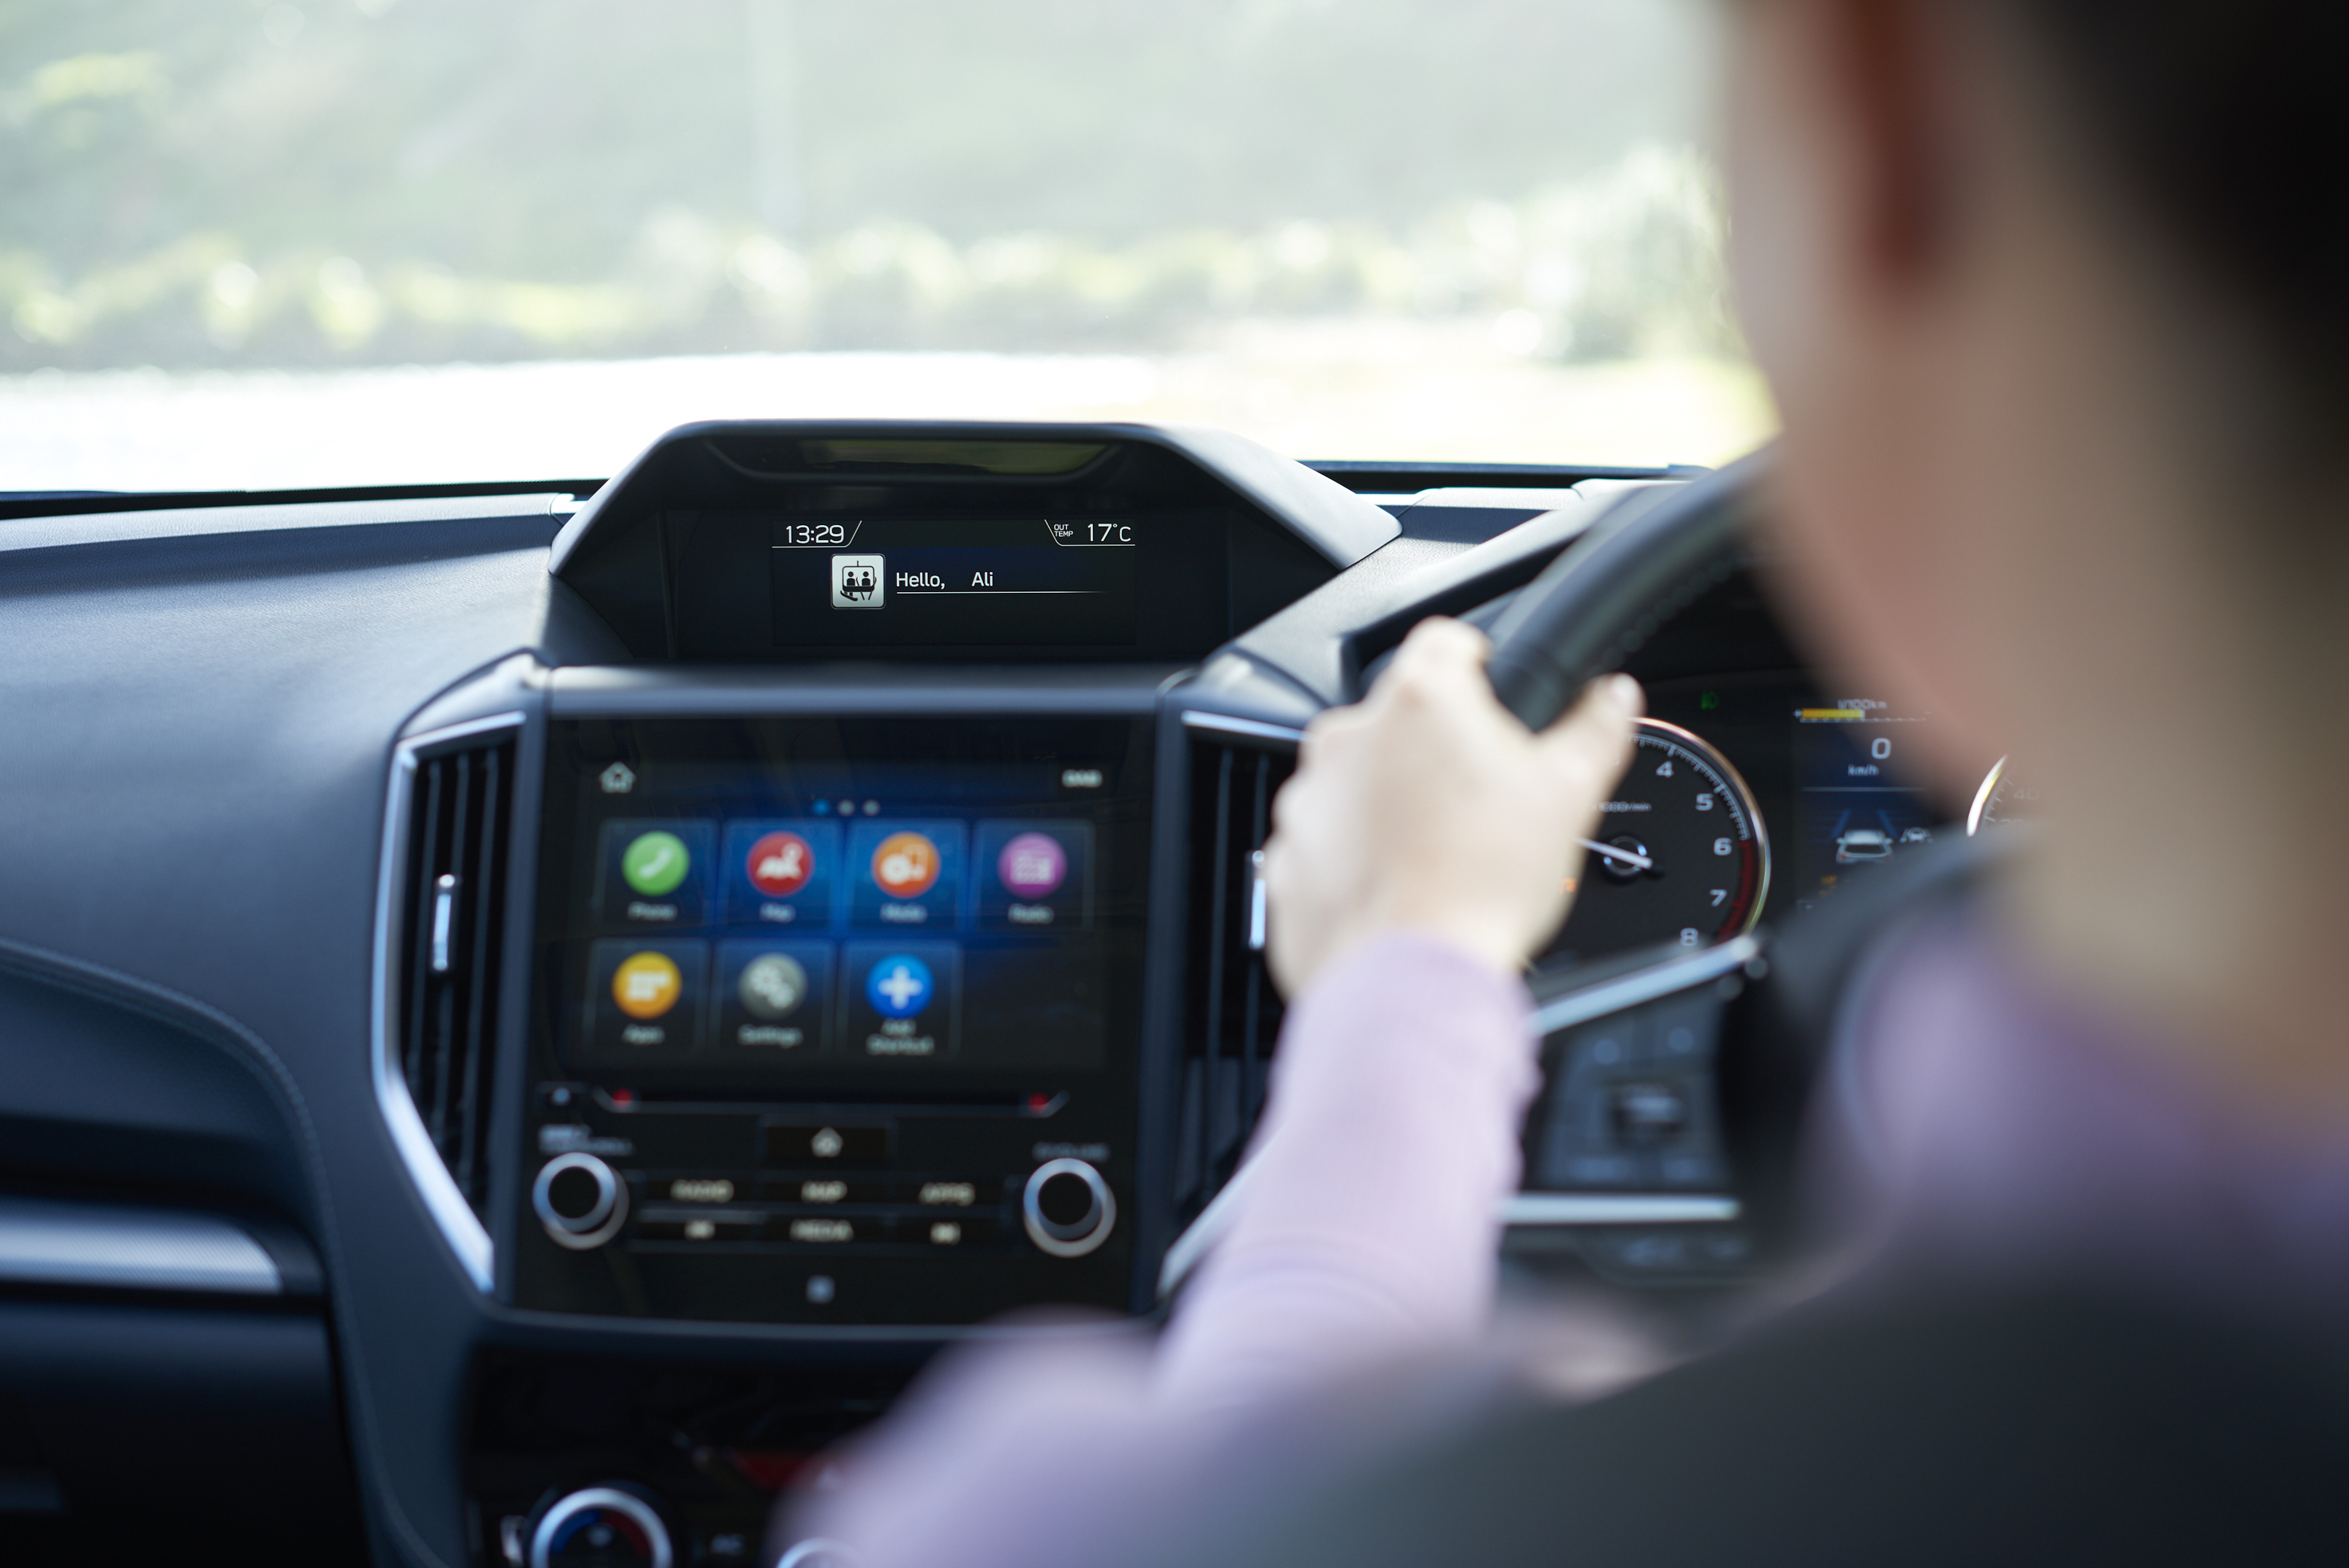 The Subaru Driver Monitoring System recognises the driver and adjusts cabin preferences and monitors the driver.